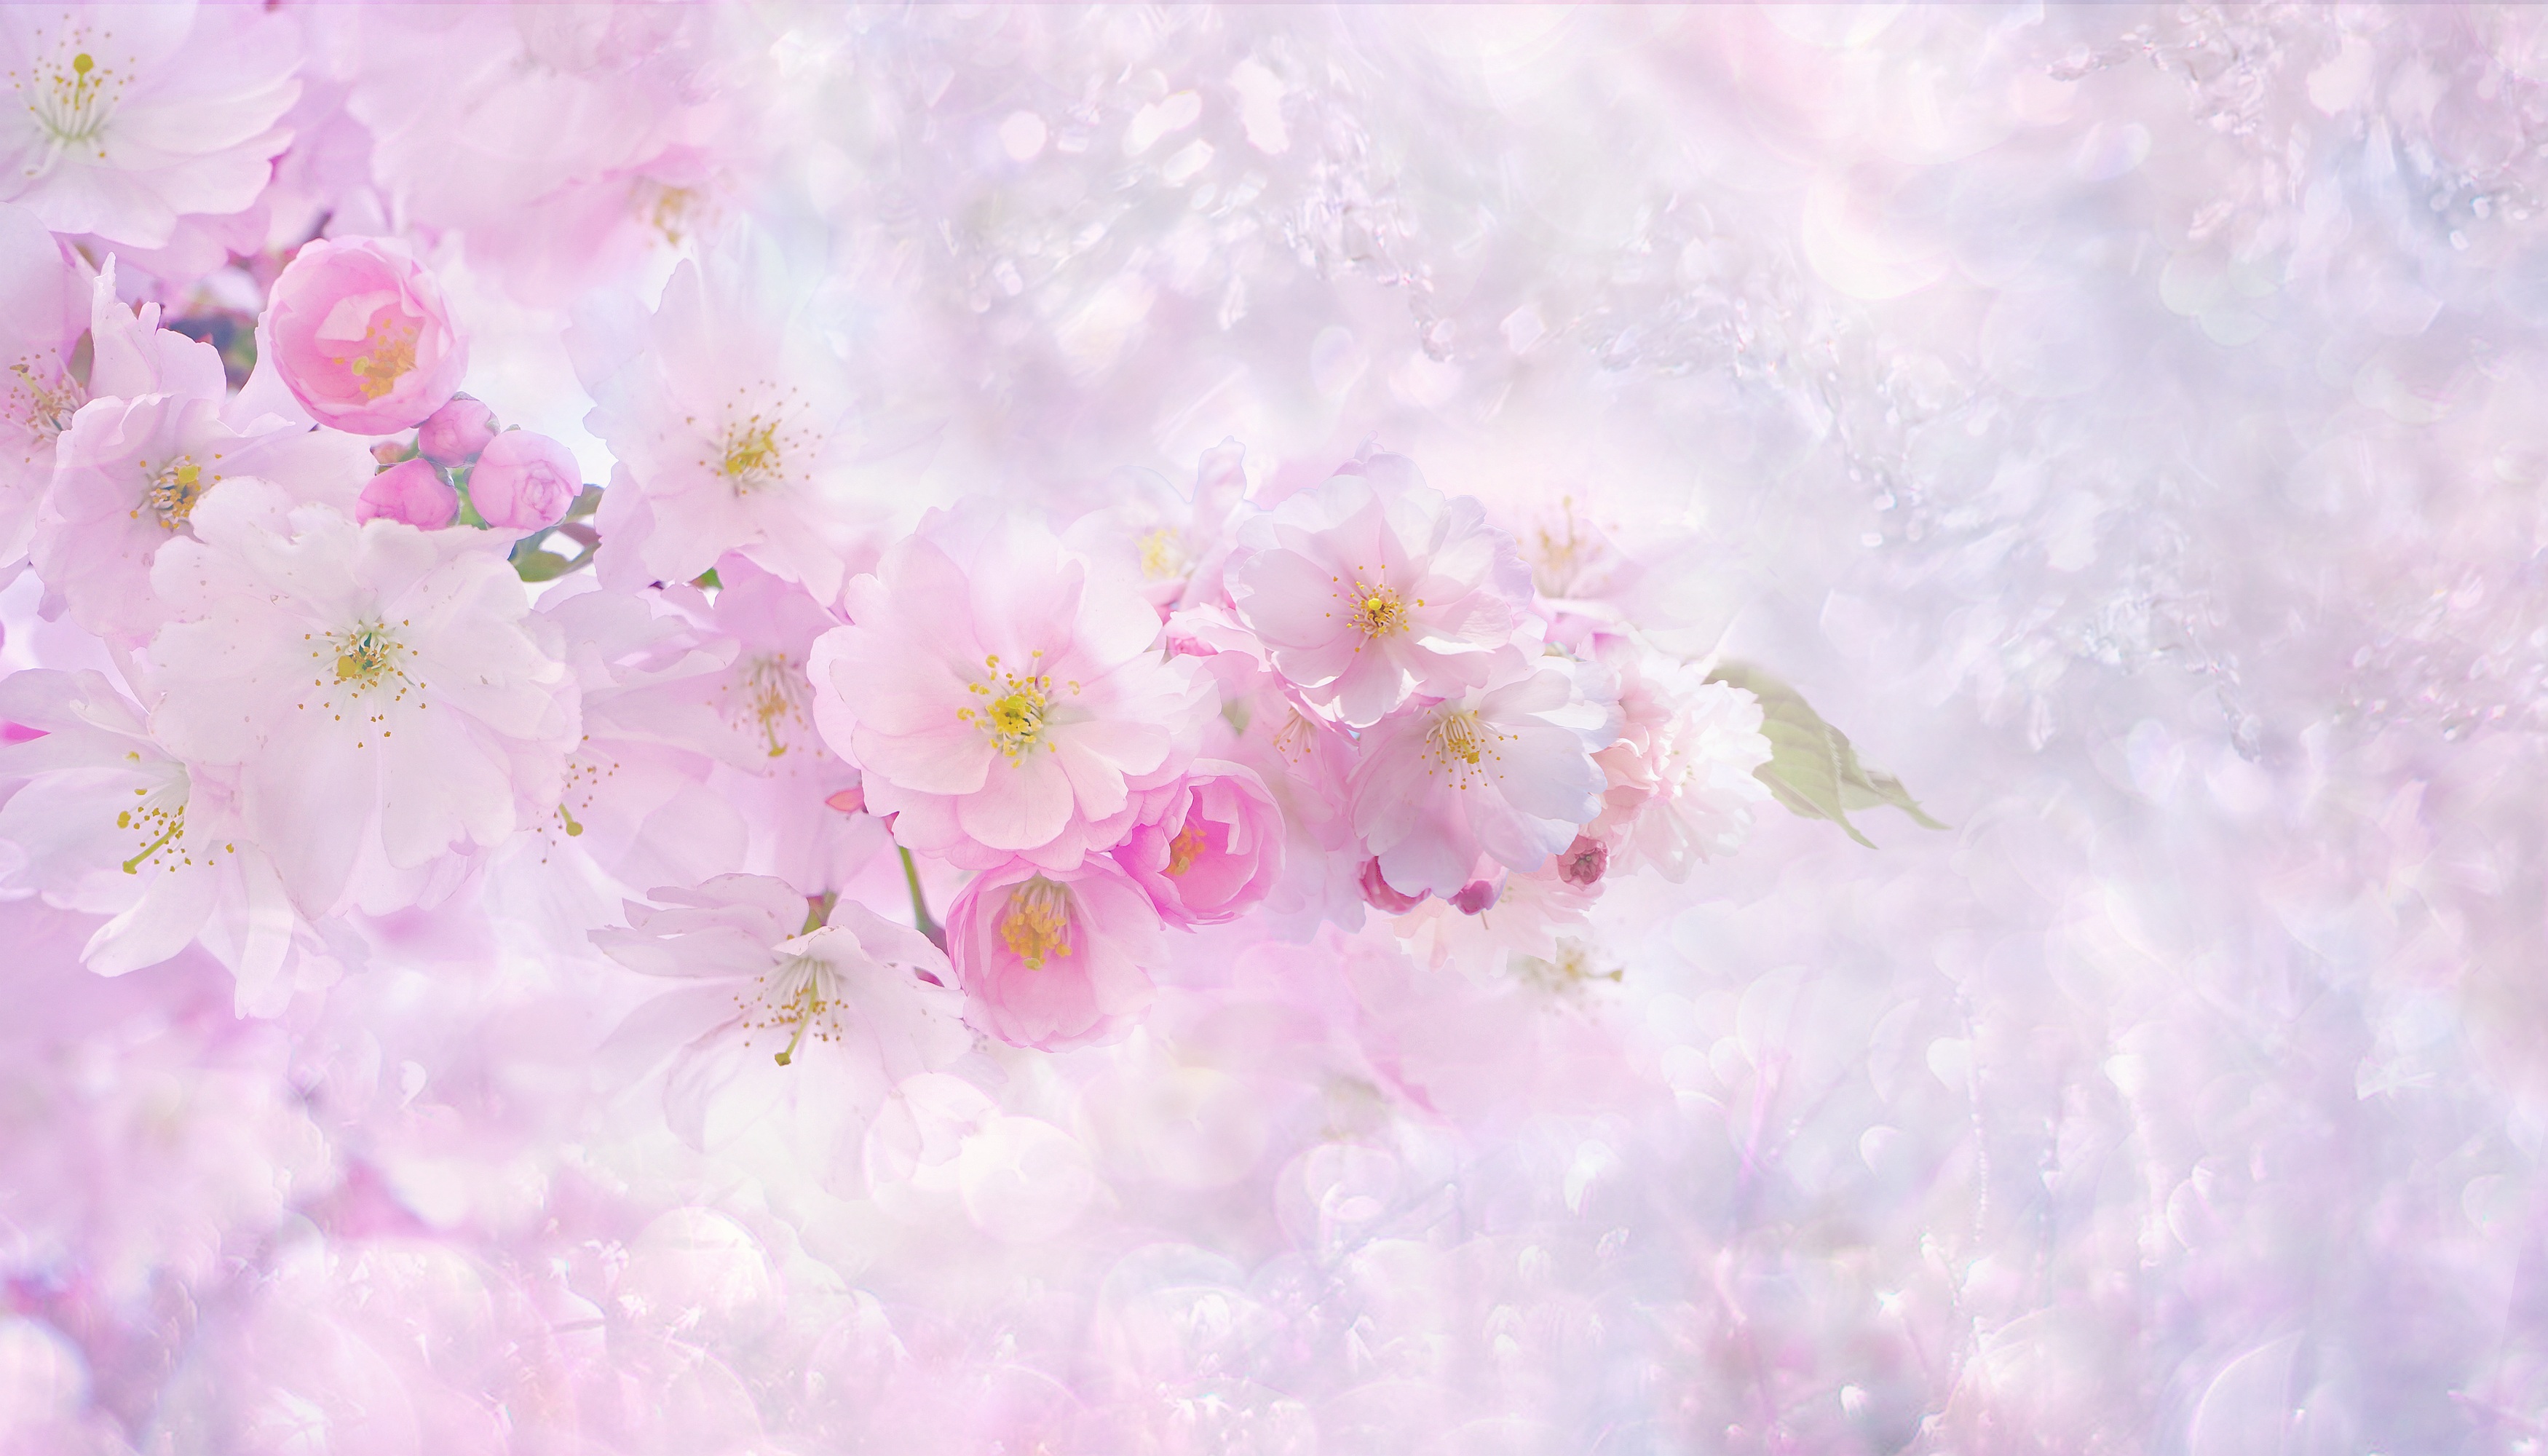 Free Photo of Pink Cherry Blossoms